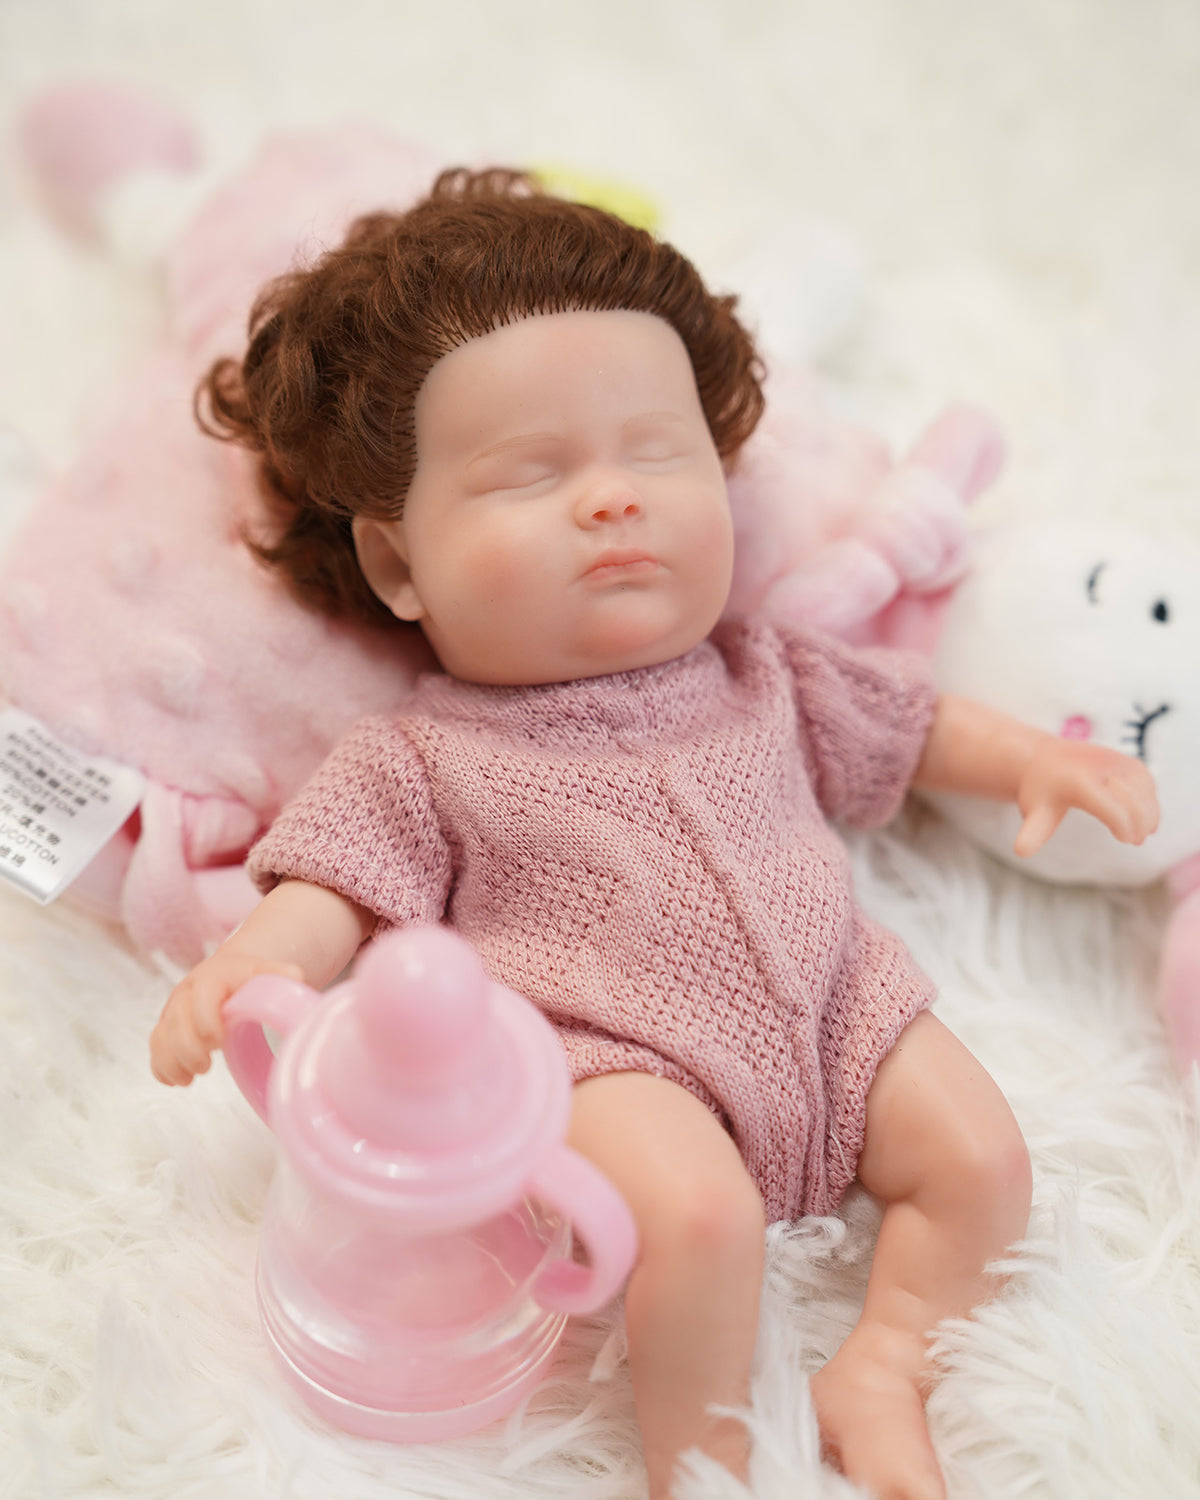 Jodie - 8" Full Silicone Reborn Baby Dolls Look Like a Realistic Baby with a Soft and Elastic Texture